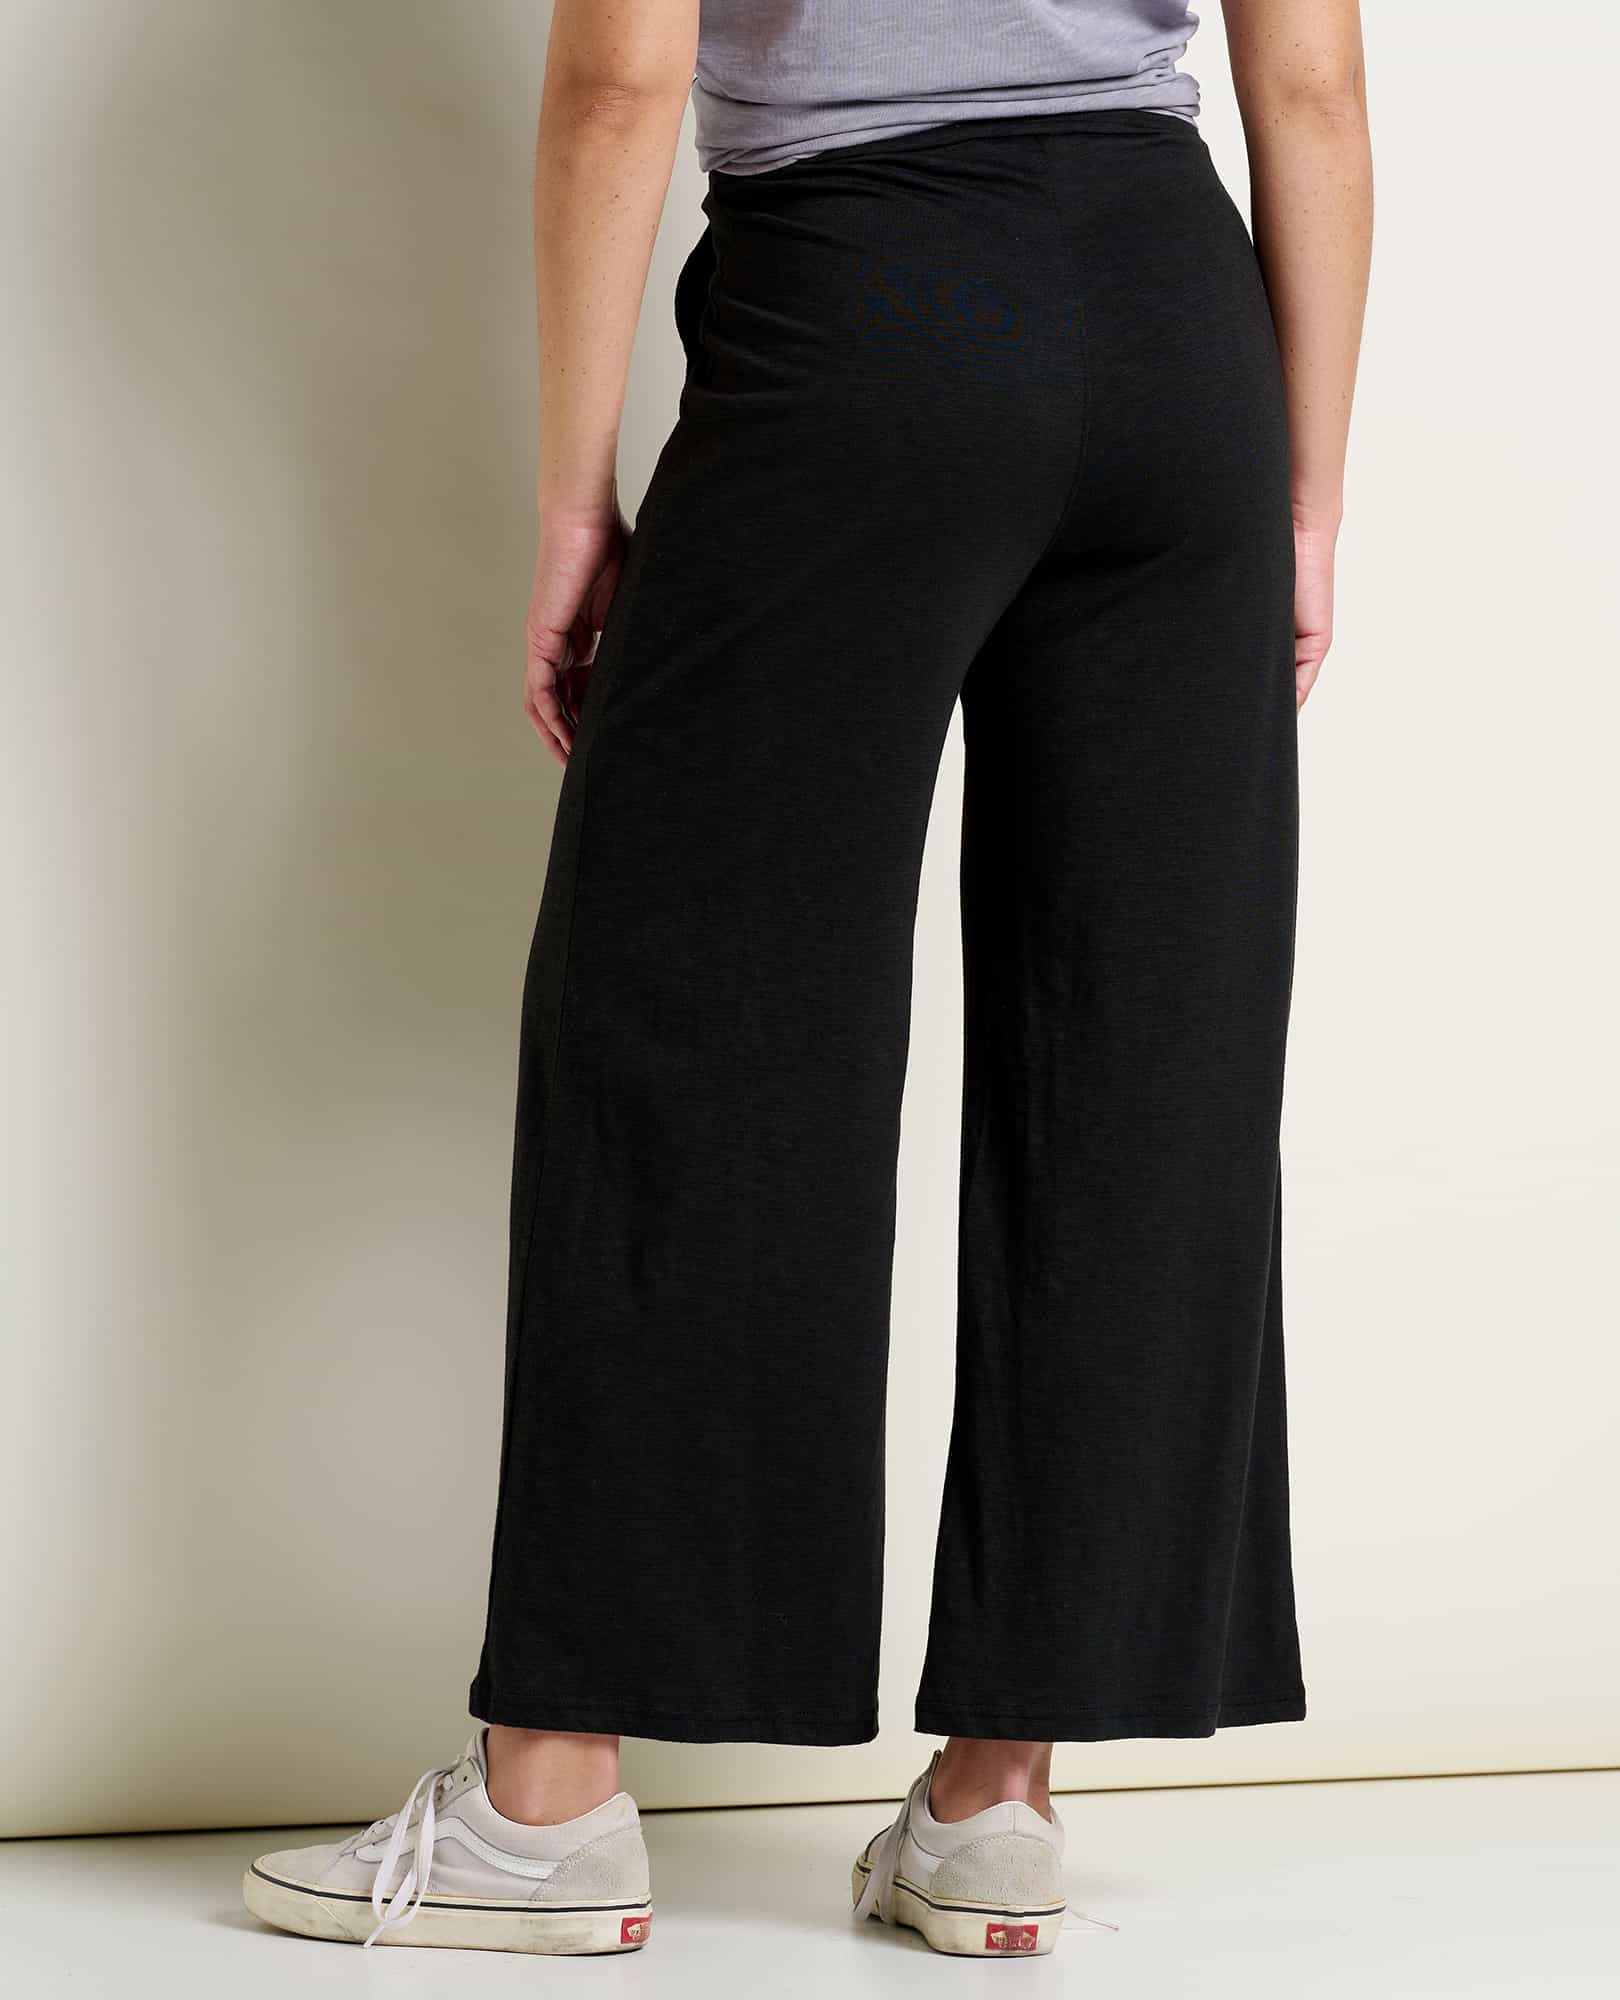 Lounge Women's Perfectly Cozy Wide Leg Pants - Stars Above